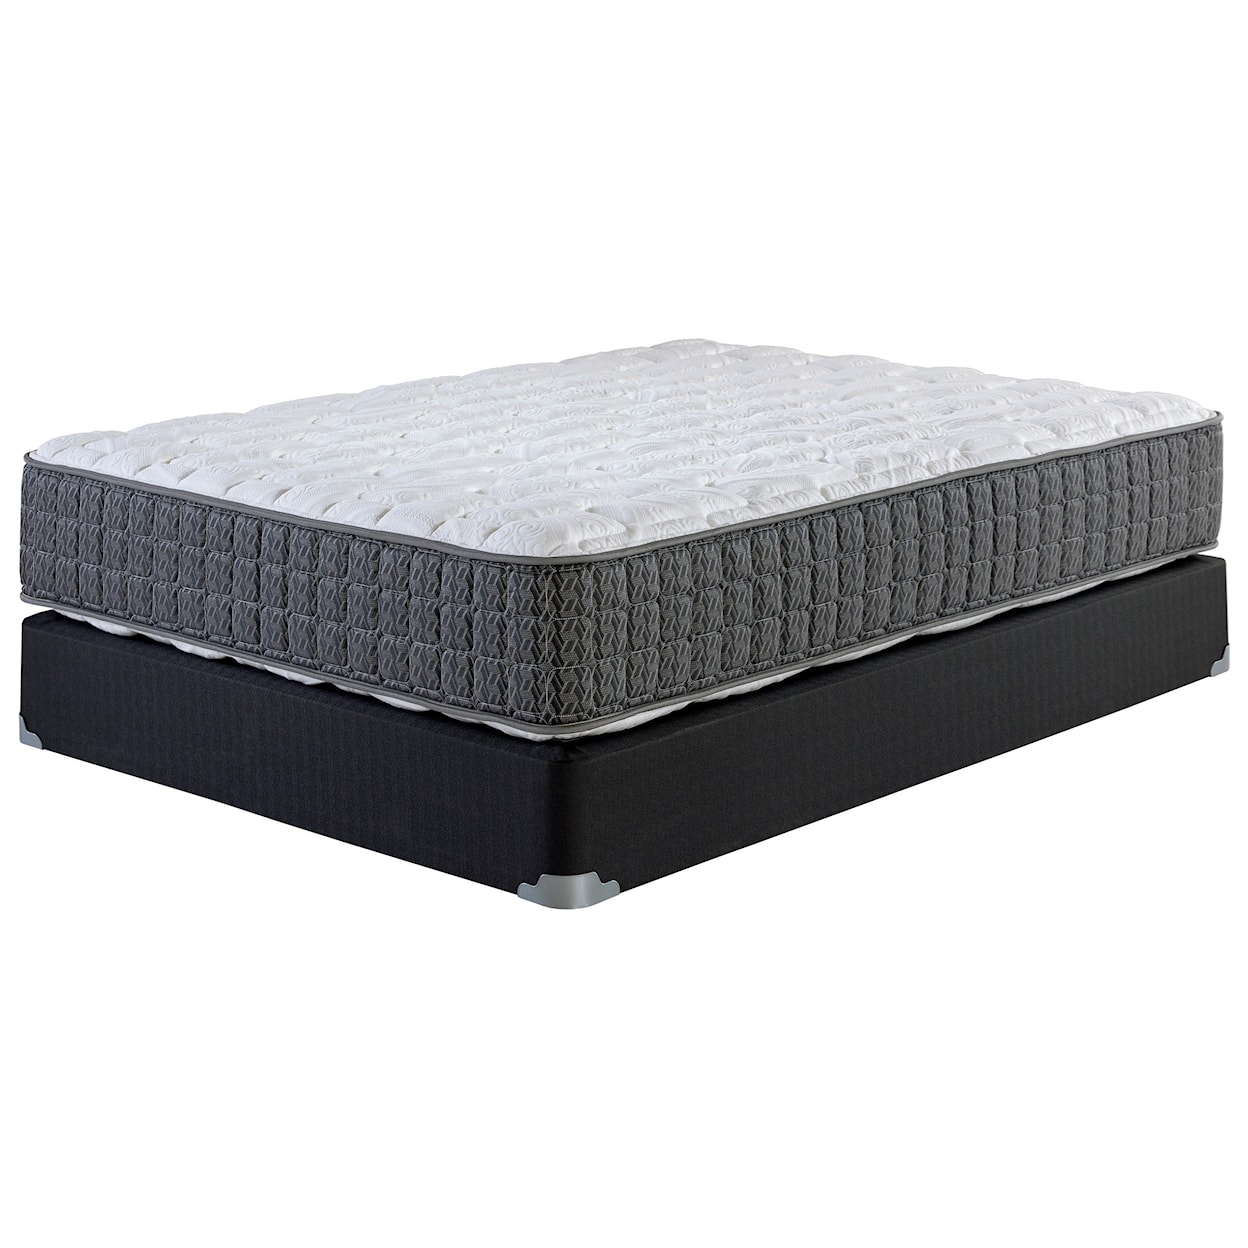 Corsicana Rossington Firm Cal King Firm Two Sided Mattress Set